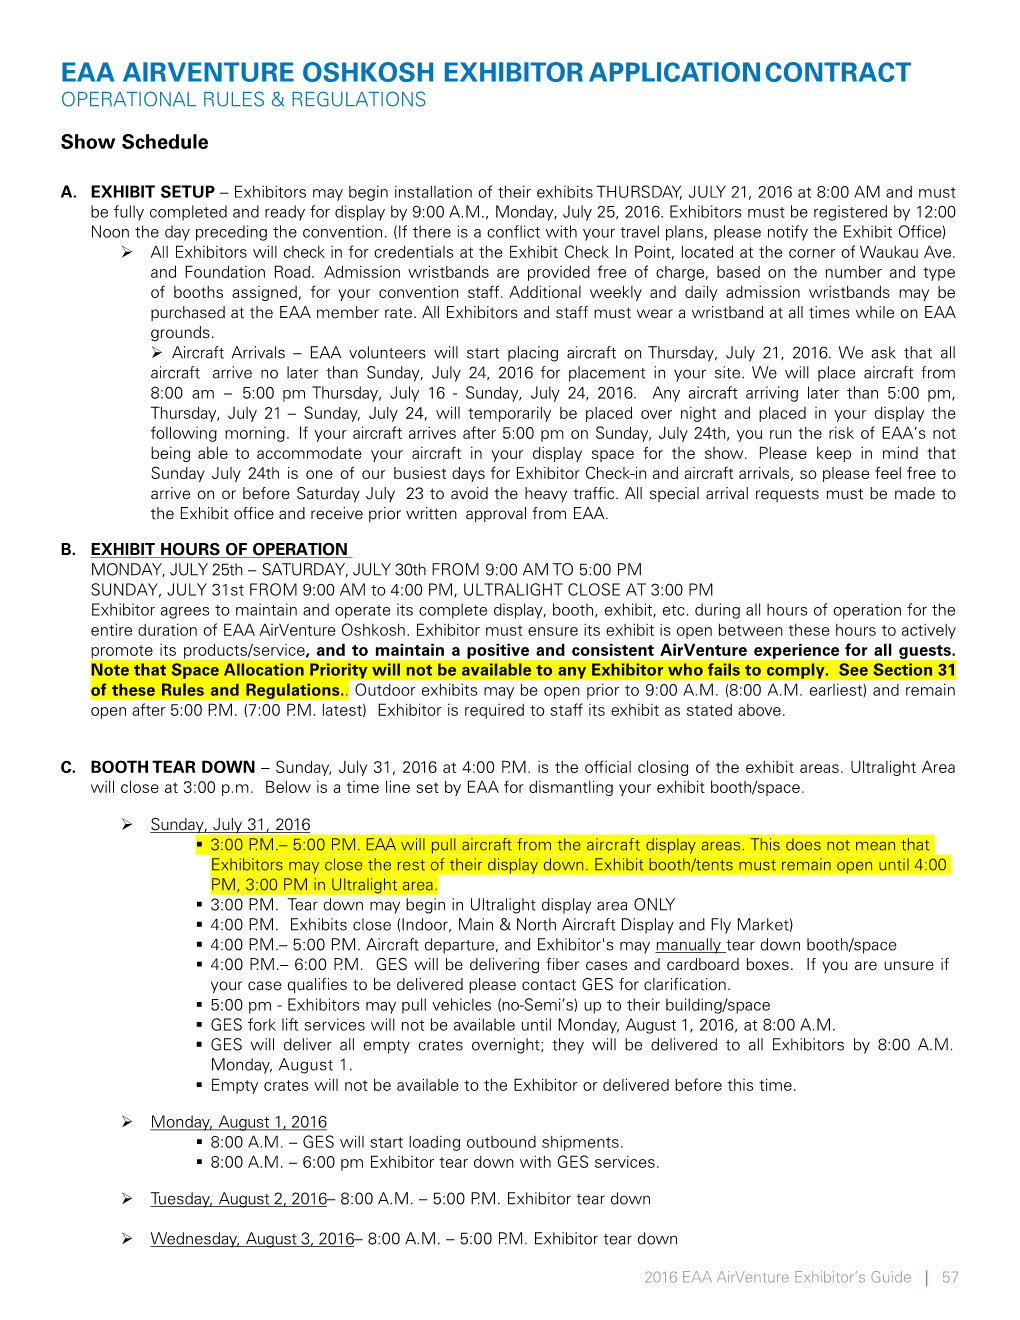 Eaa Airventure Oshkosh Exhibitor Application Contract Operational Rules & Regulations